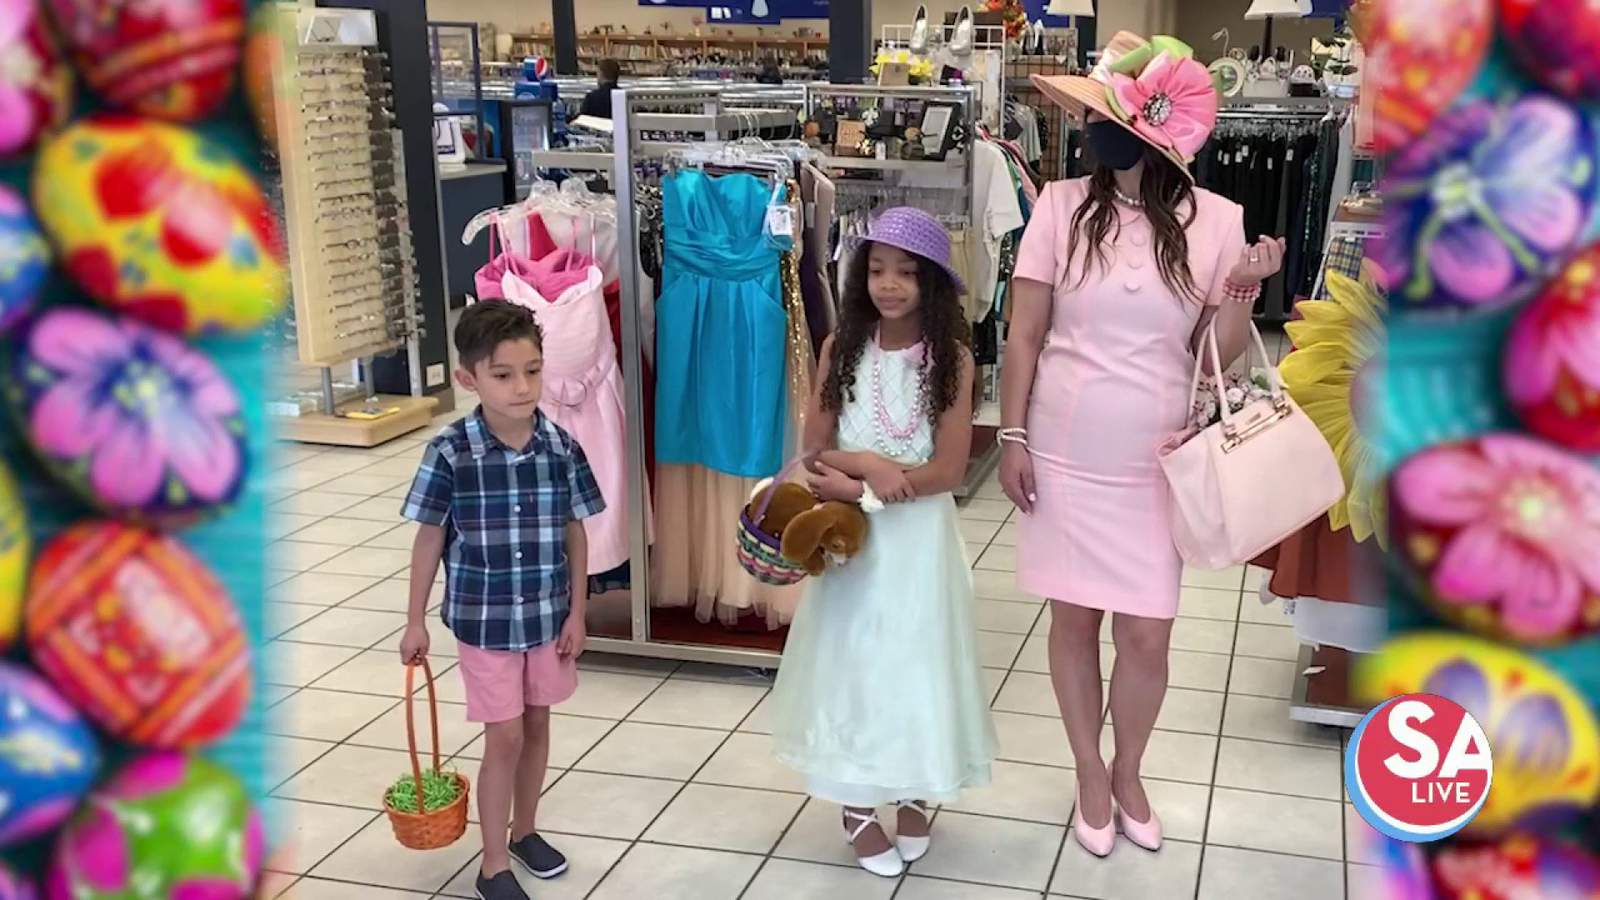 The Look: Easter fashion for less than $10